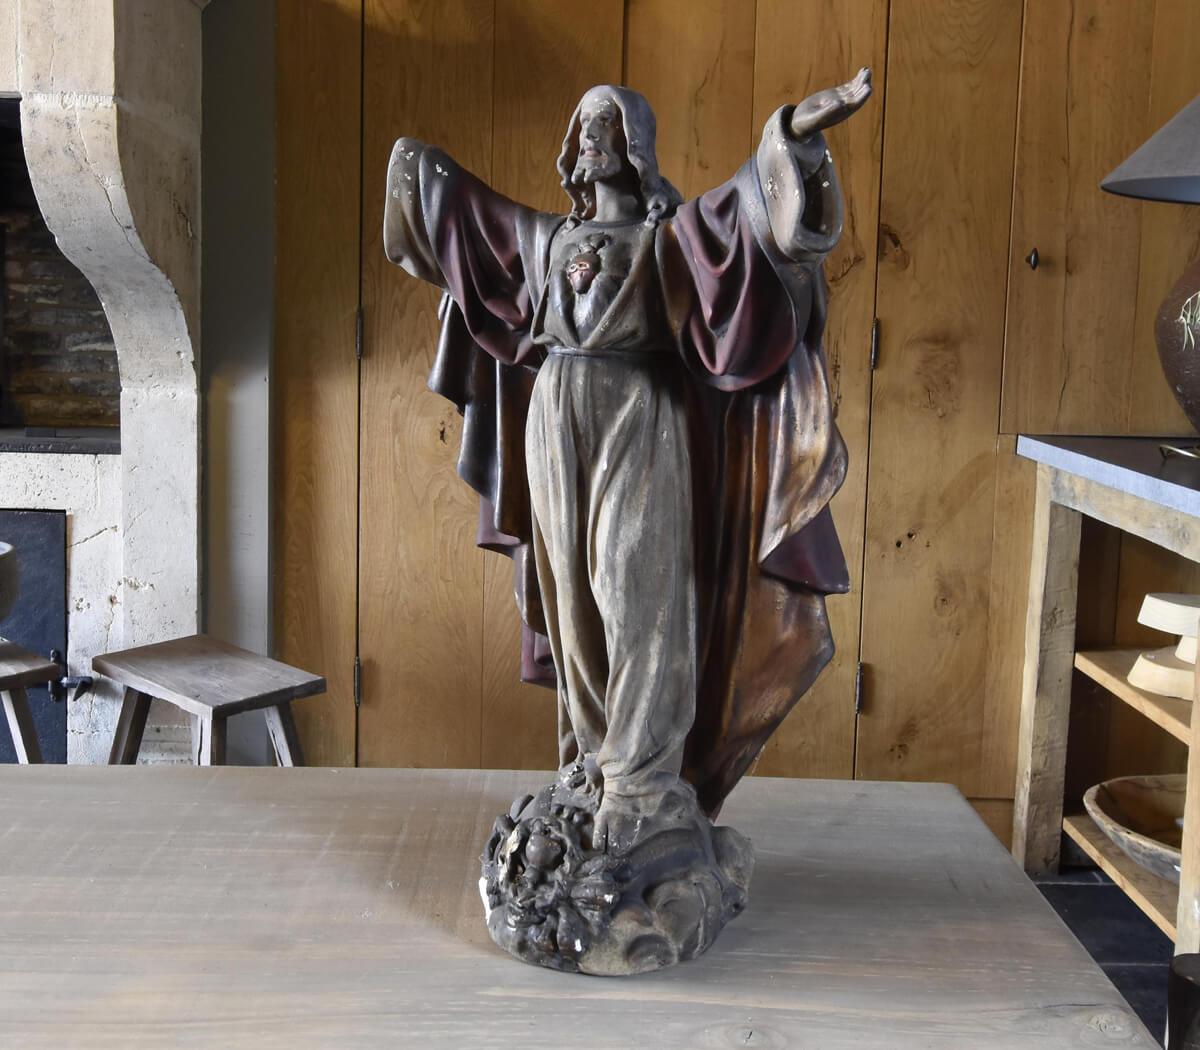 mary and jesus statue for sale